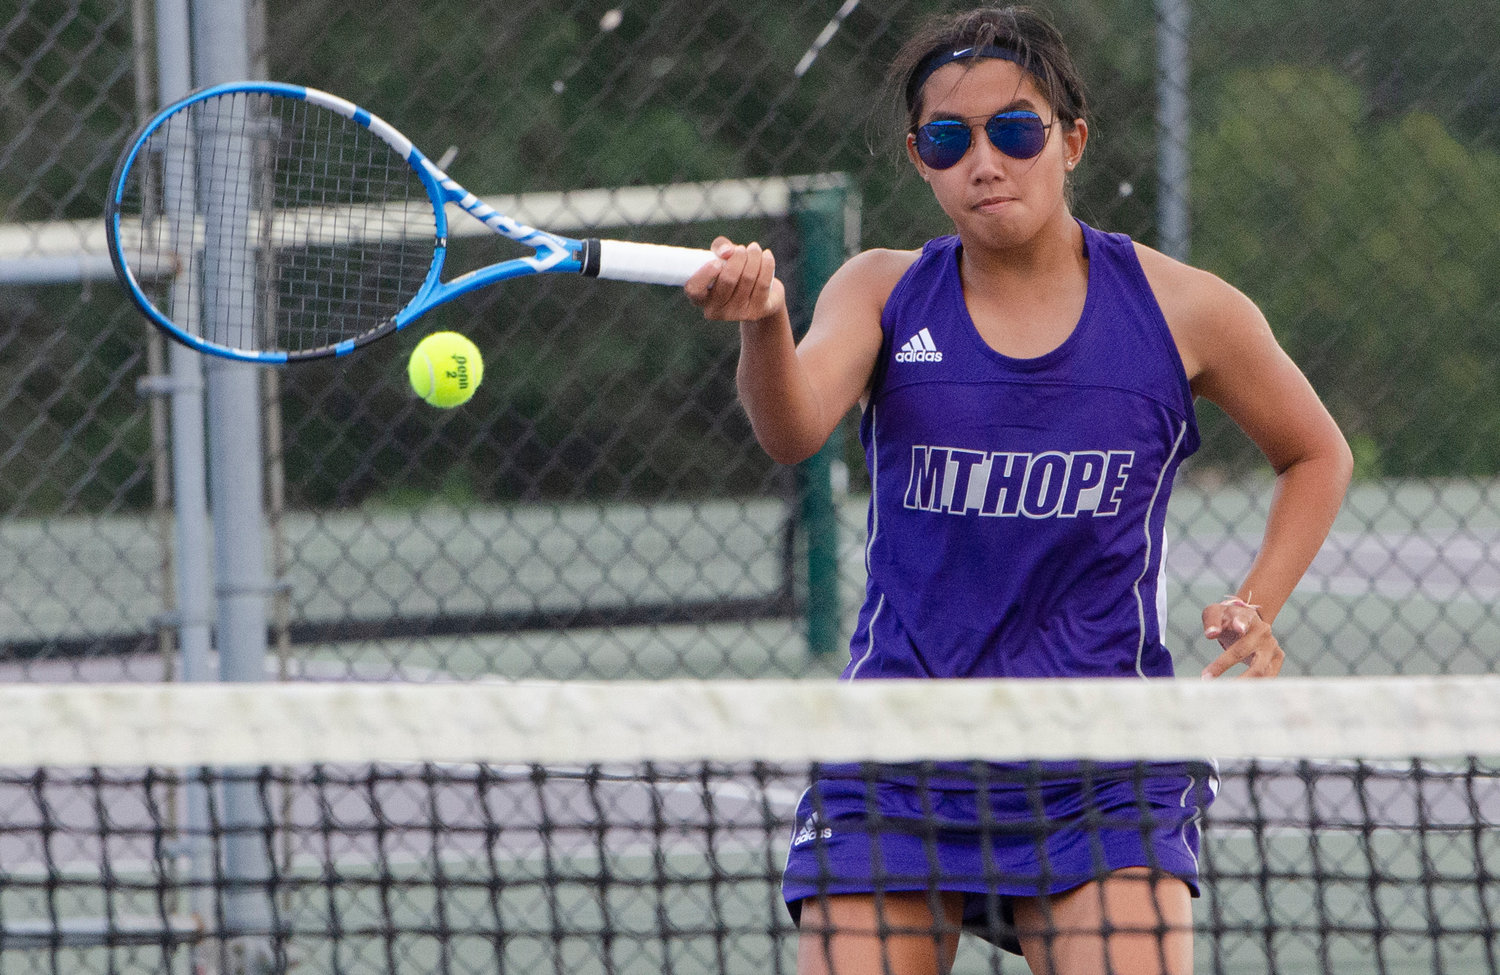 Second singles player Eva White slams a shot at the net, past her South Kingstown opponent.